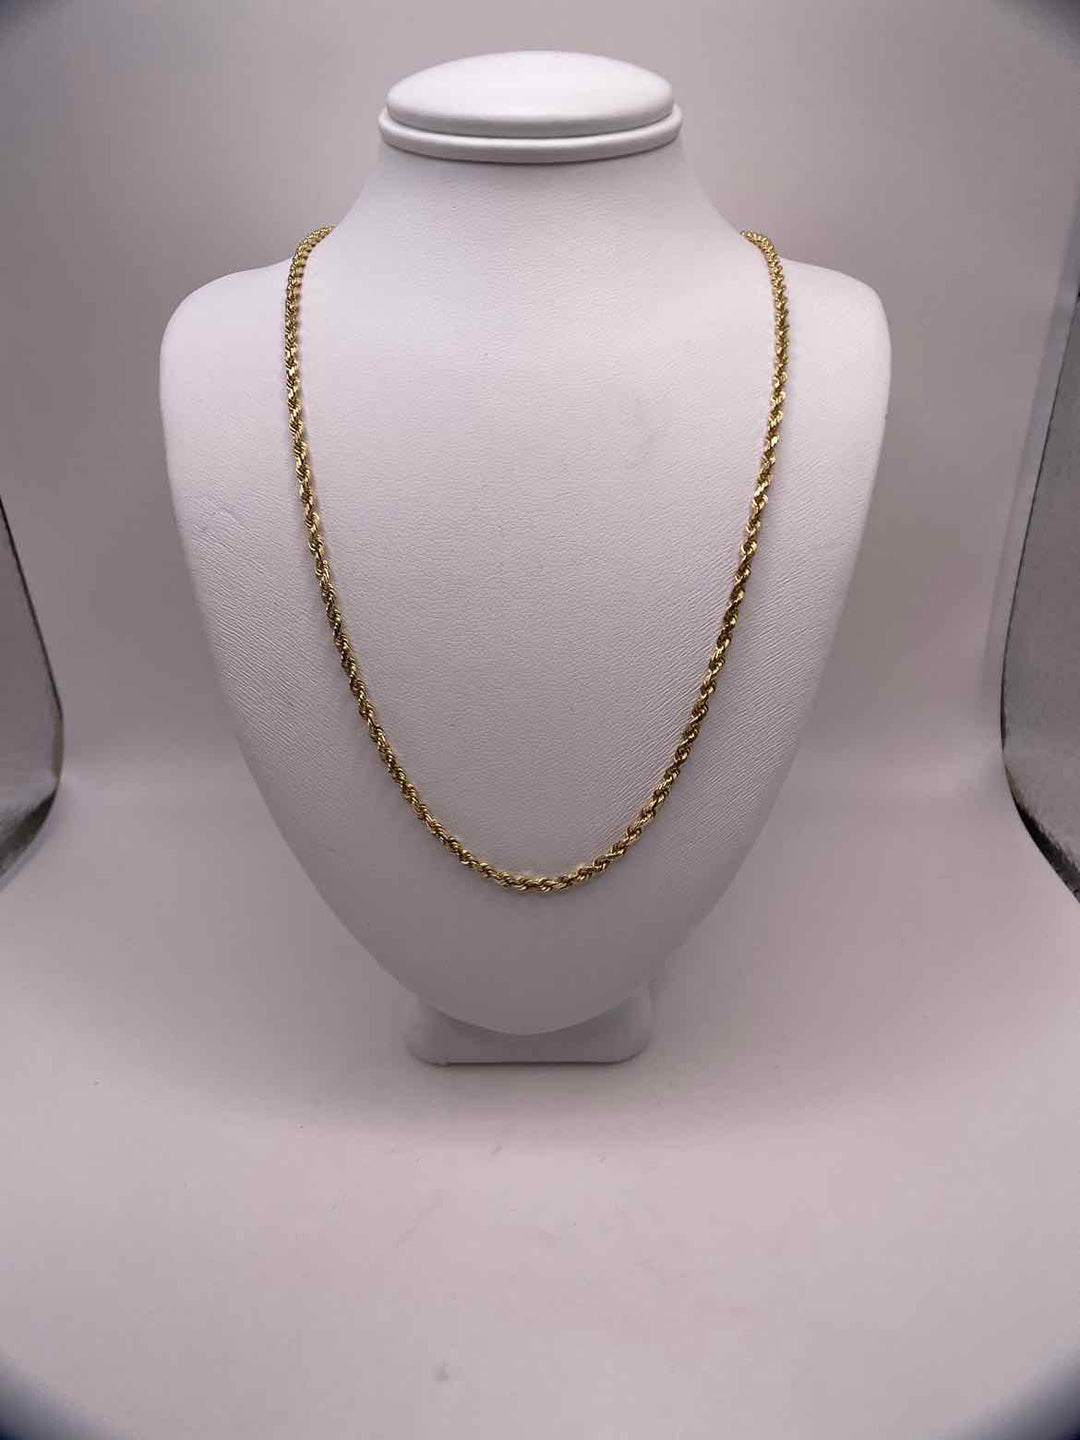 simplyposhconsign Necklace 14KY YELLOW GOLD 2mm FRENCH TWIST CHAIN